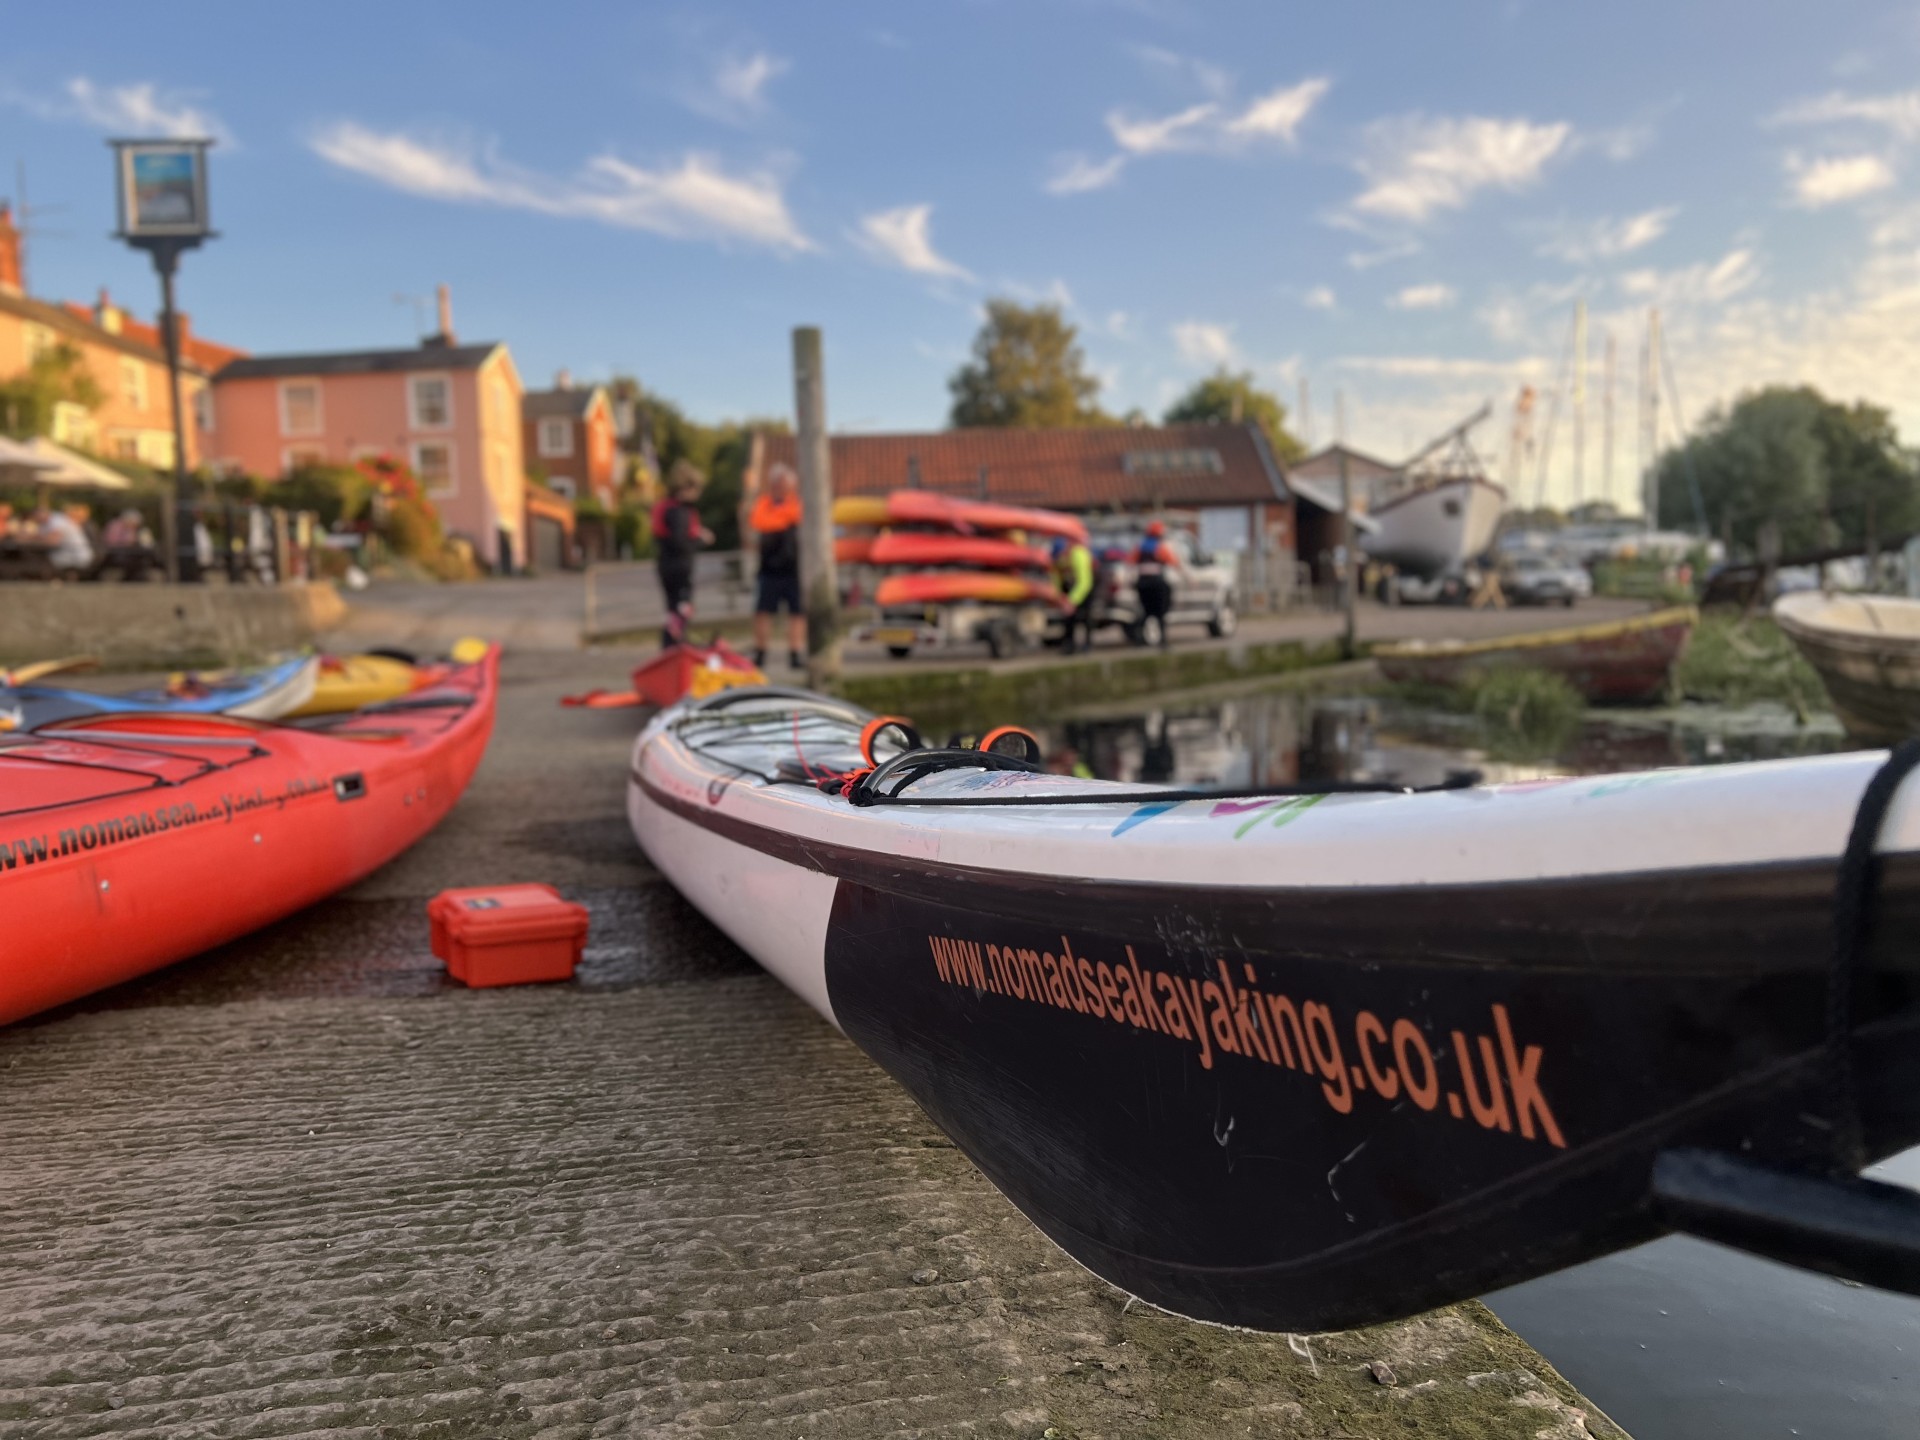 Kayaks on a slipway ready to launch.